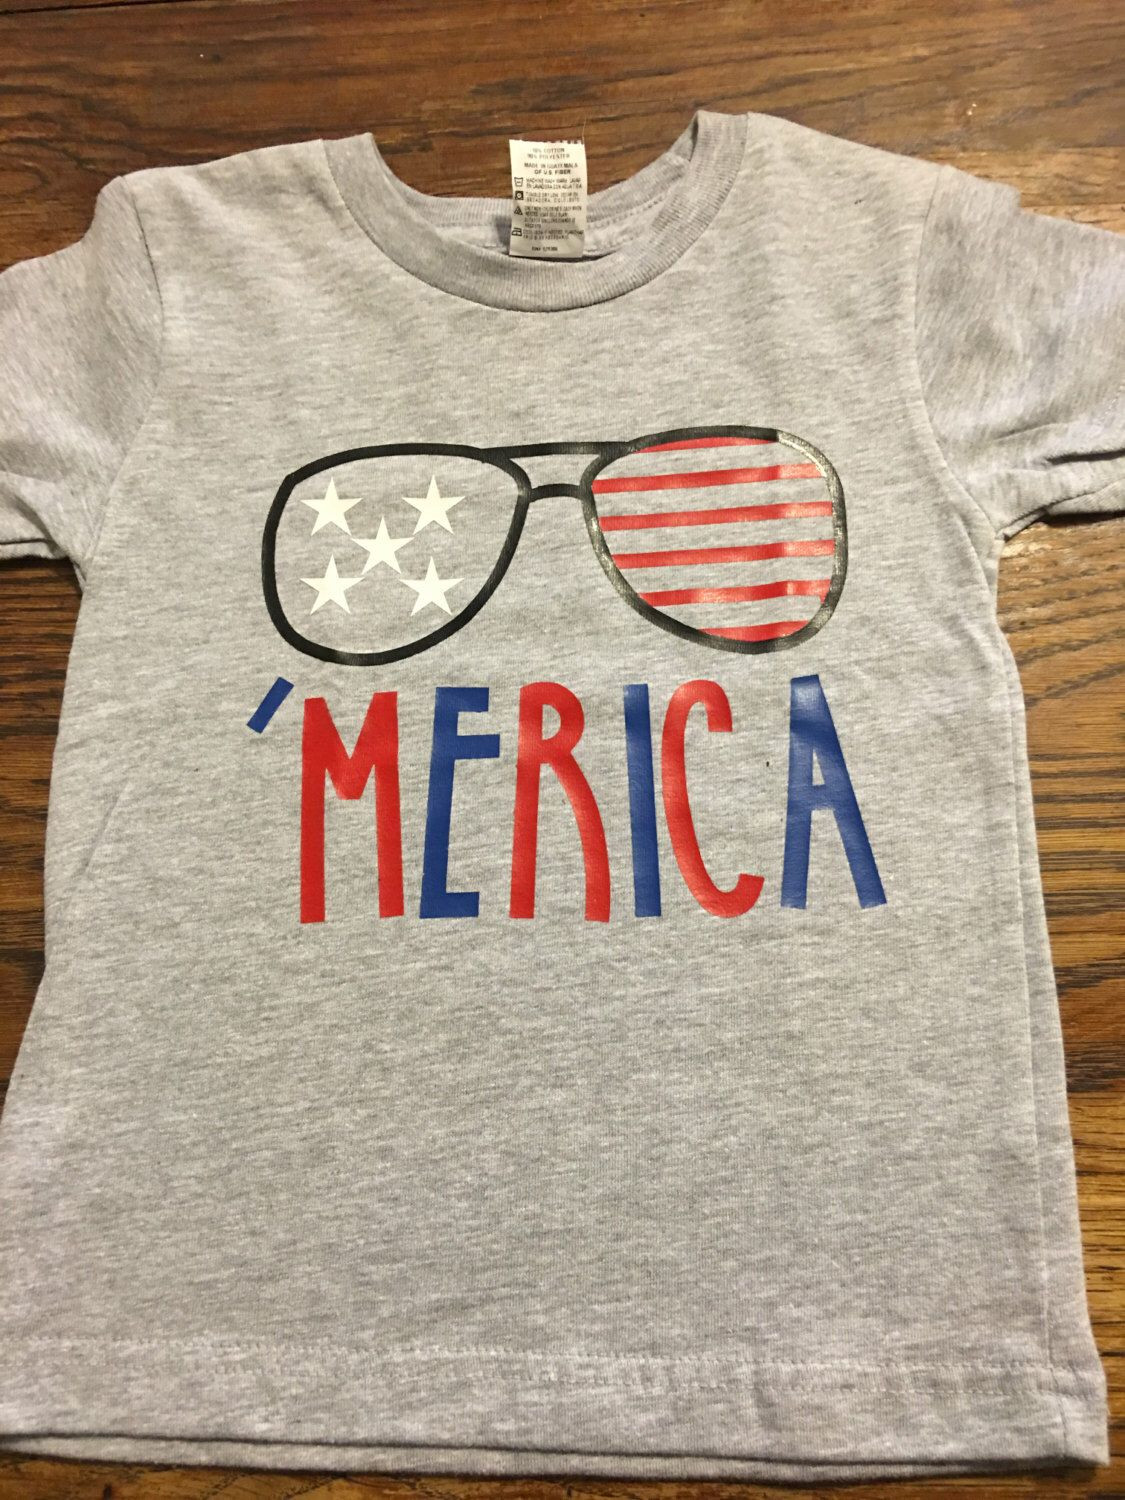 Fourth Of July Shirt Ideas
 Pin by Bailee Julick on Jaxon